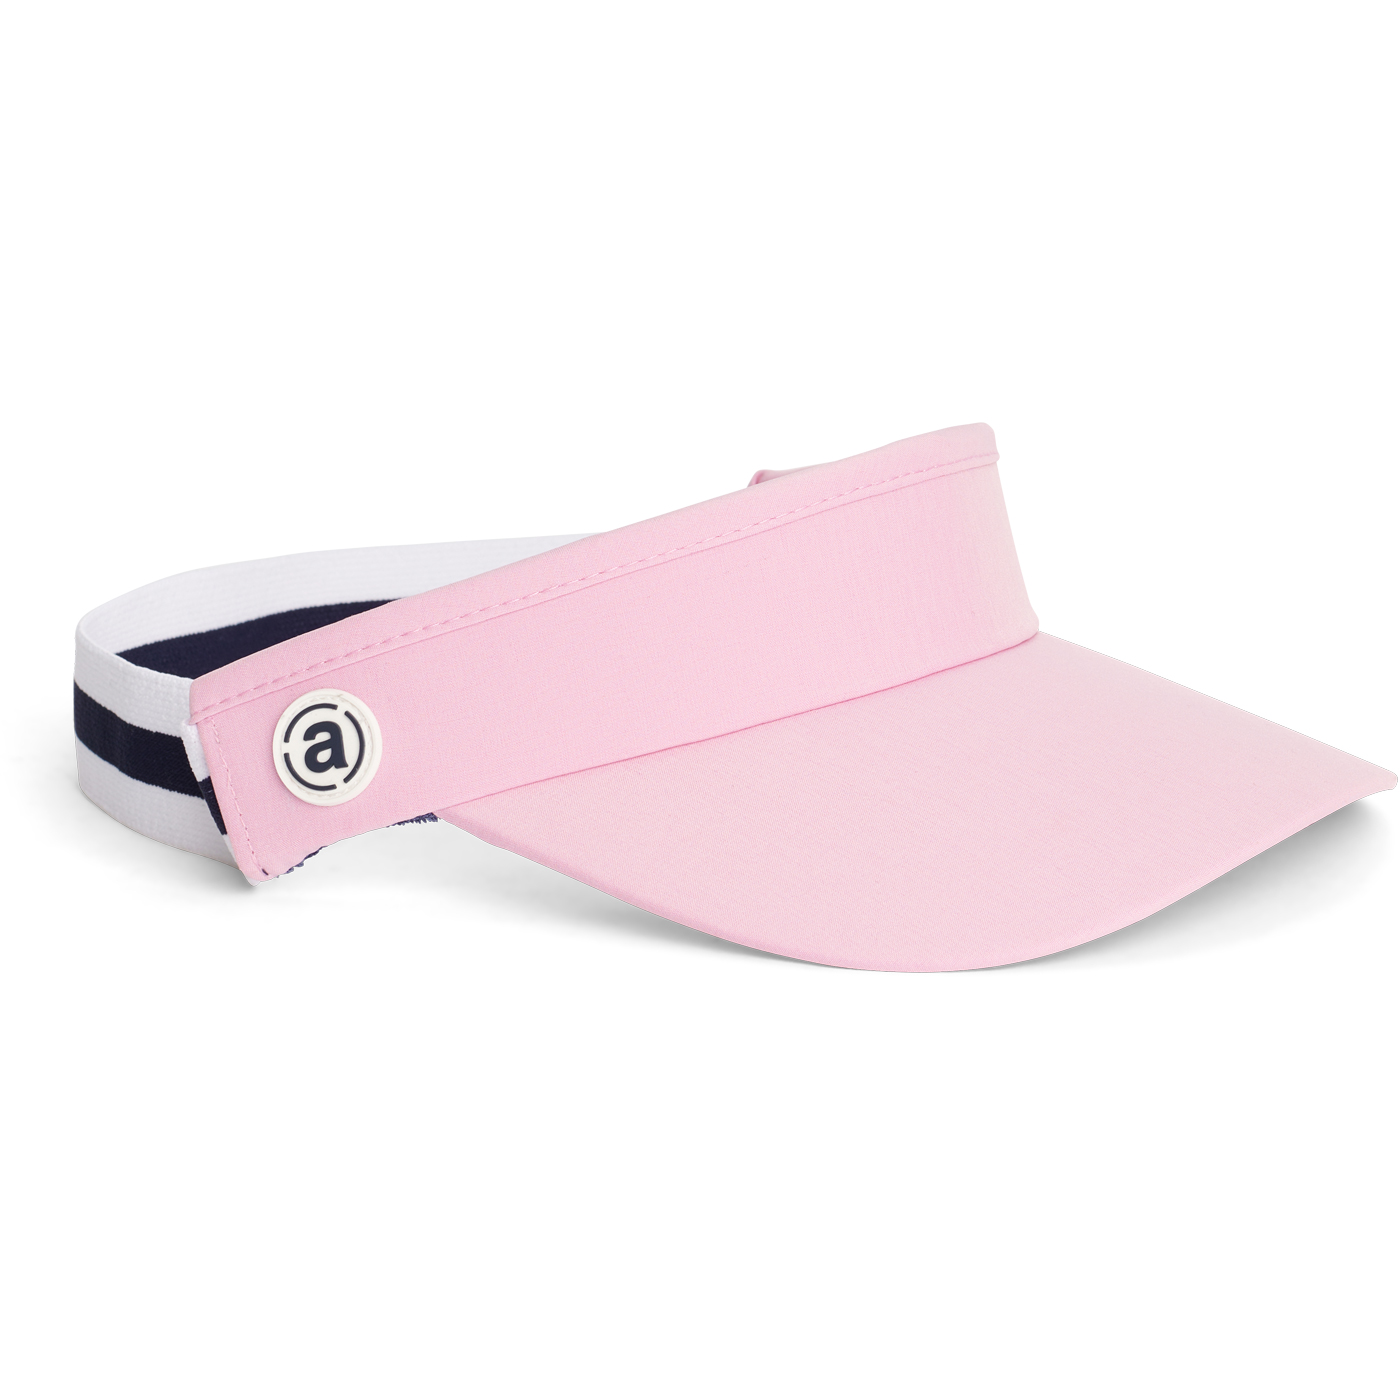 Kildare Stripe visor - peony in the group WOMEN / Accessories at Abacus Sportswear (7376390)